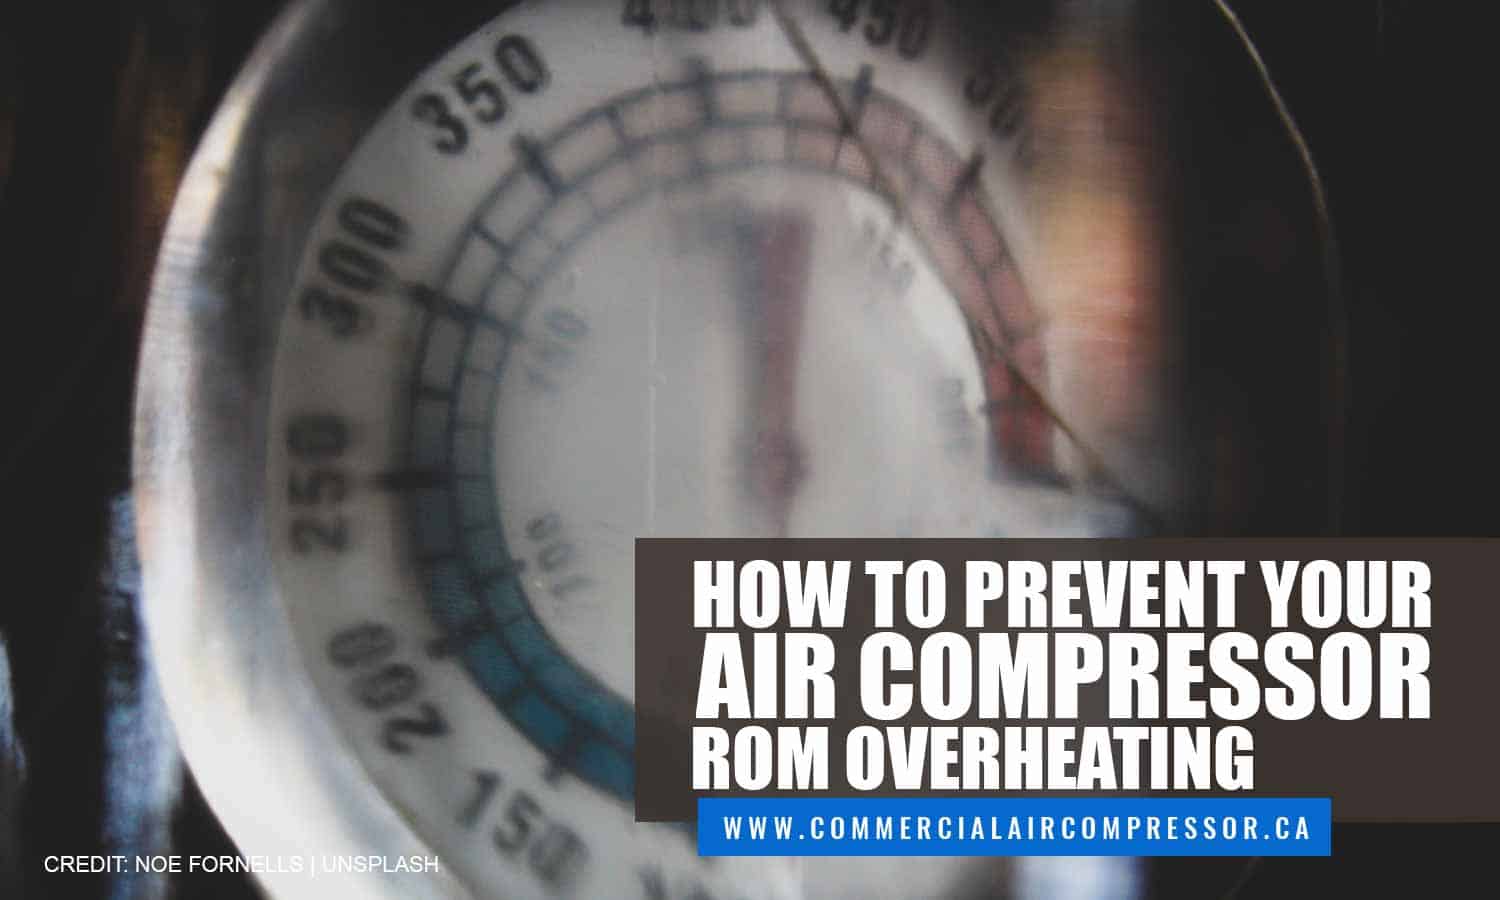 How to Prevent Your Air Compressor From Overheating